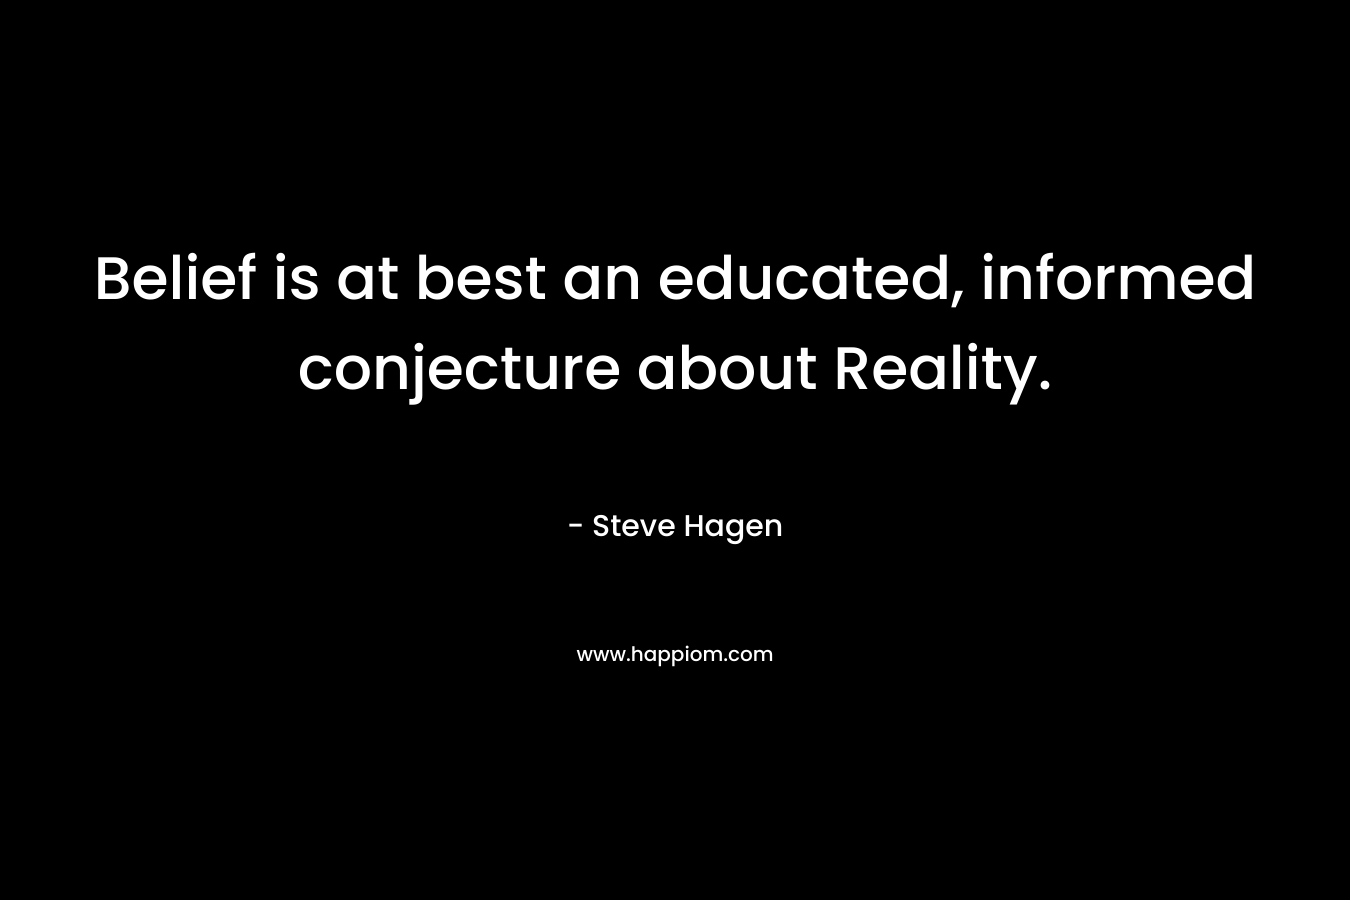 Belief is at best an educated, informed conjecture about Reality. – Steve Hagen